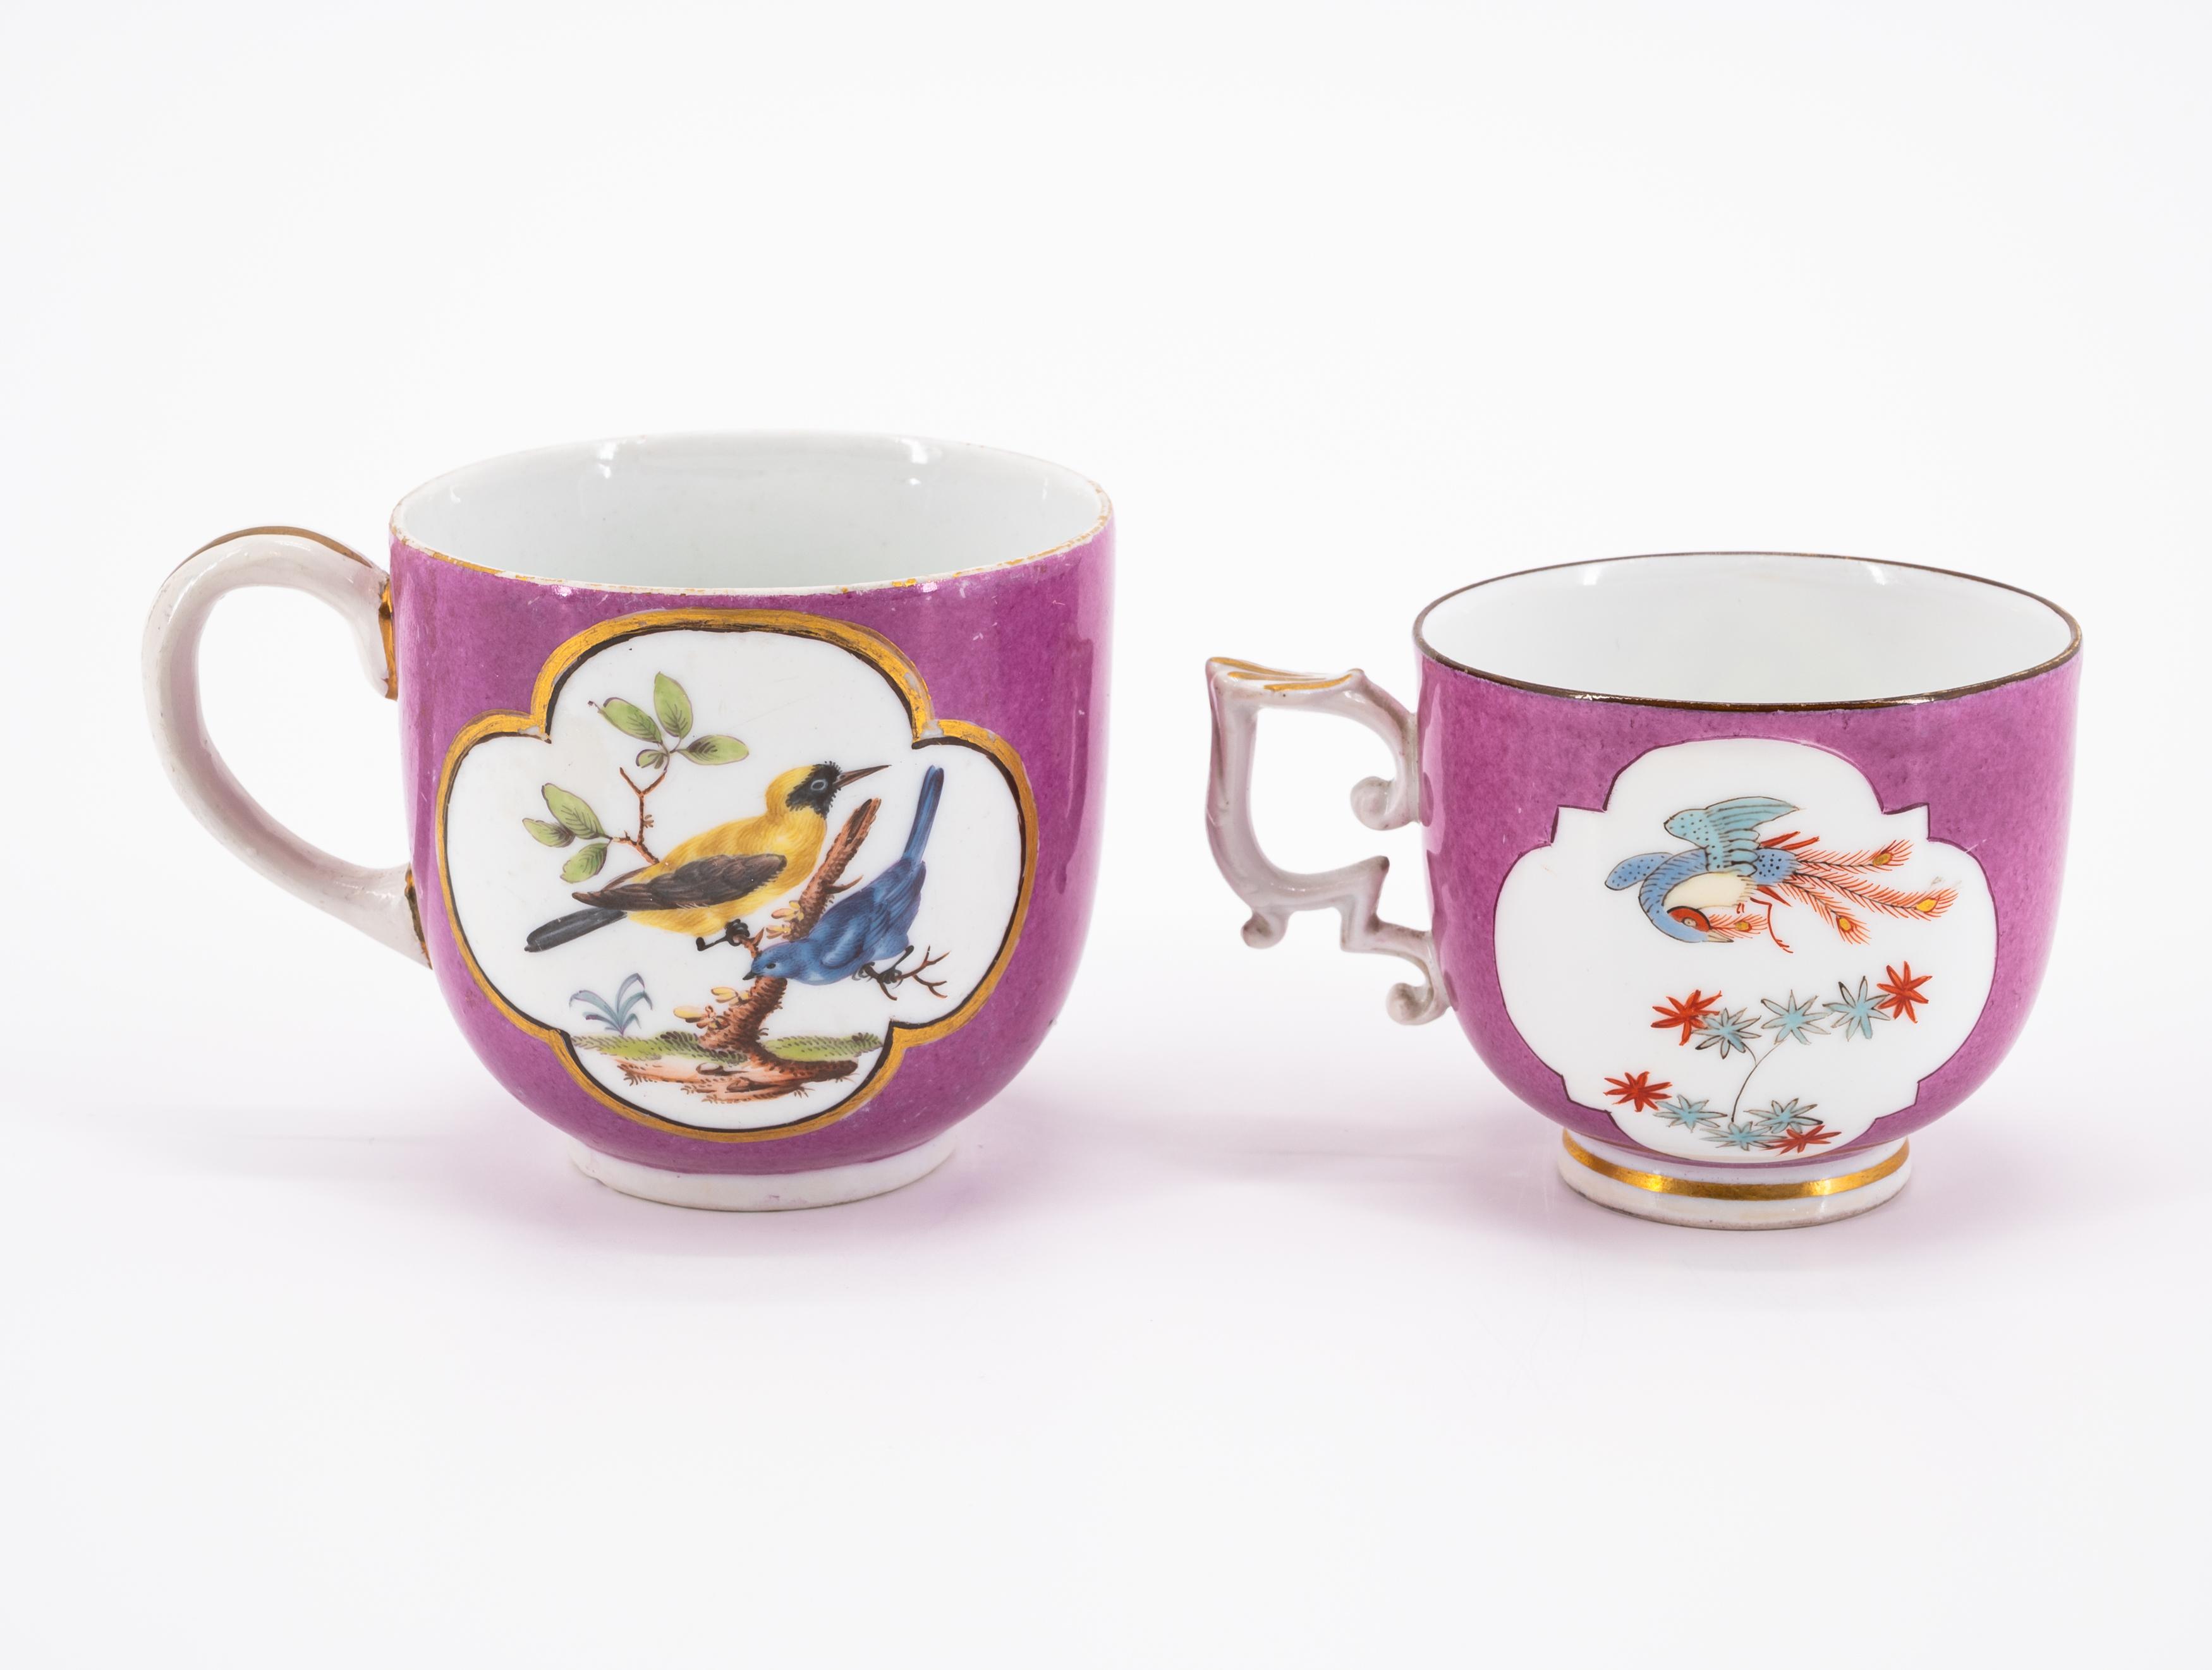 ONE PORCELAIN CUP AND SAUCER WITH QUAIL DECOR & TWO CUPS WITH PURPLE BACKGROUND AND BIRD DECOATIONS - Image 3 of 11